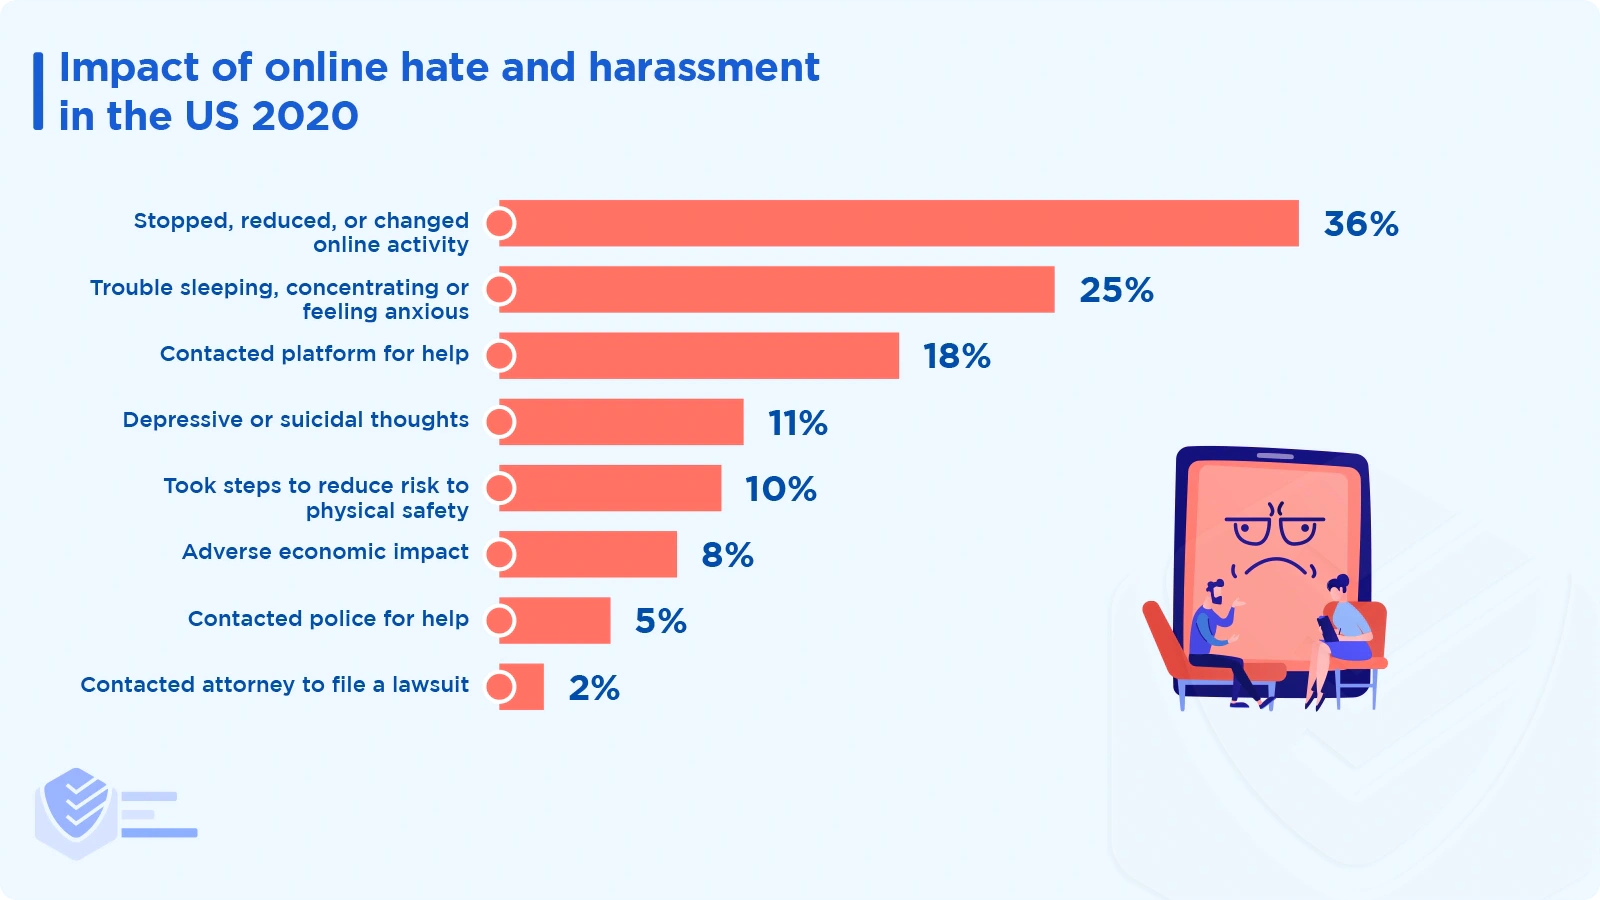 Impact of online hate and harassment in the US 2020